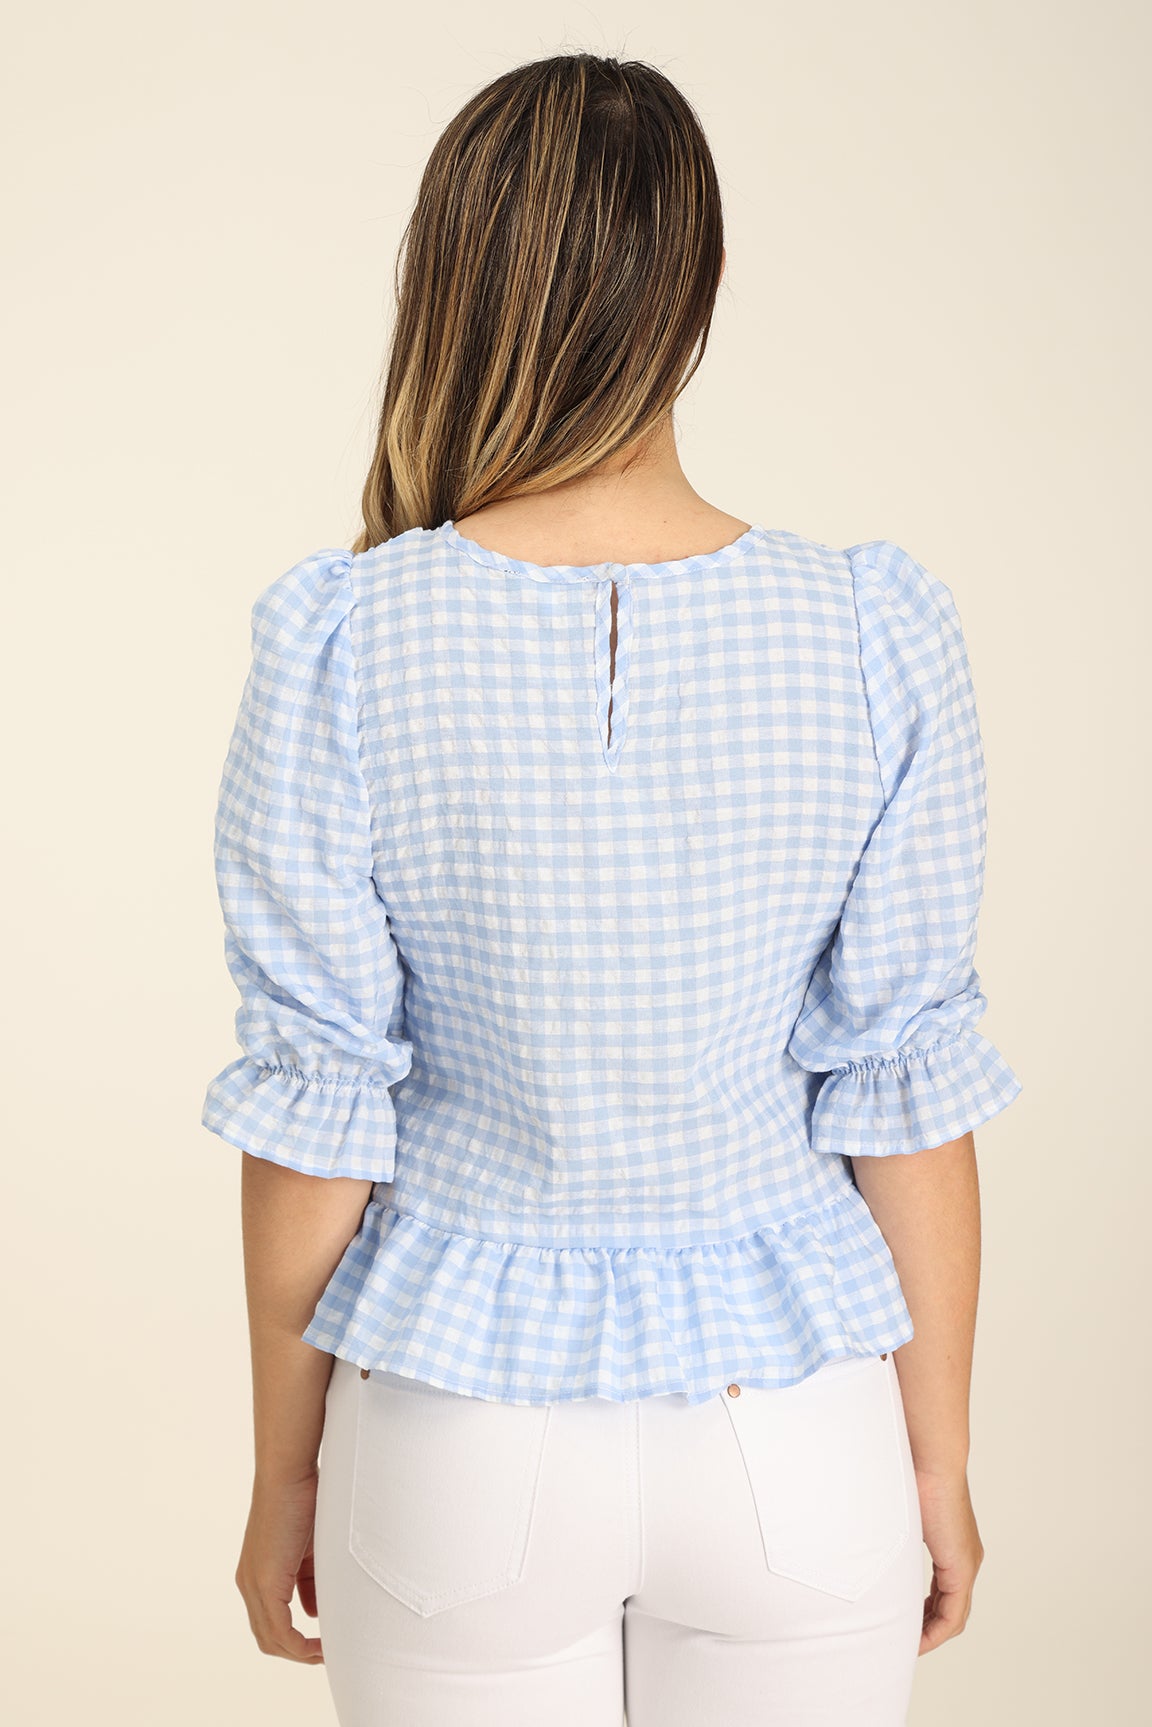 Gingham Check Top in Blue